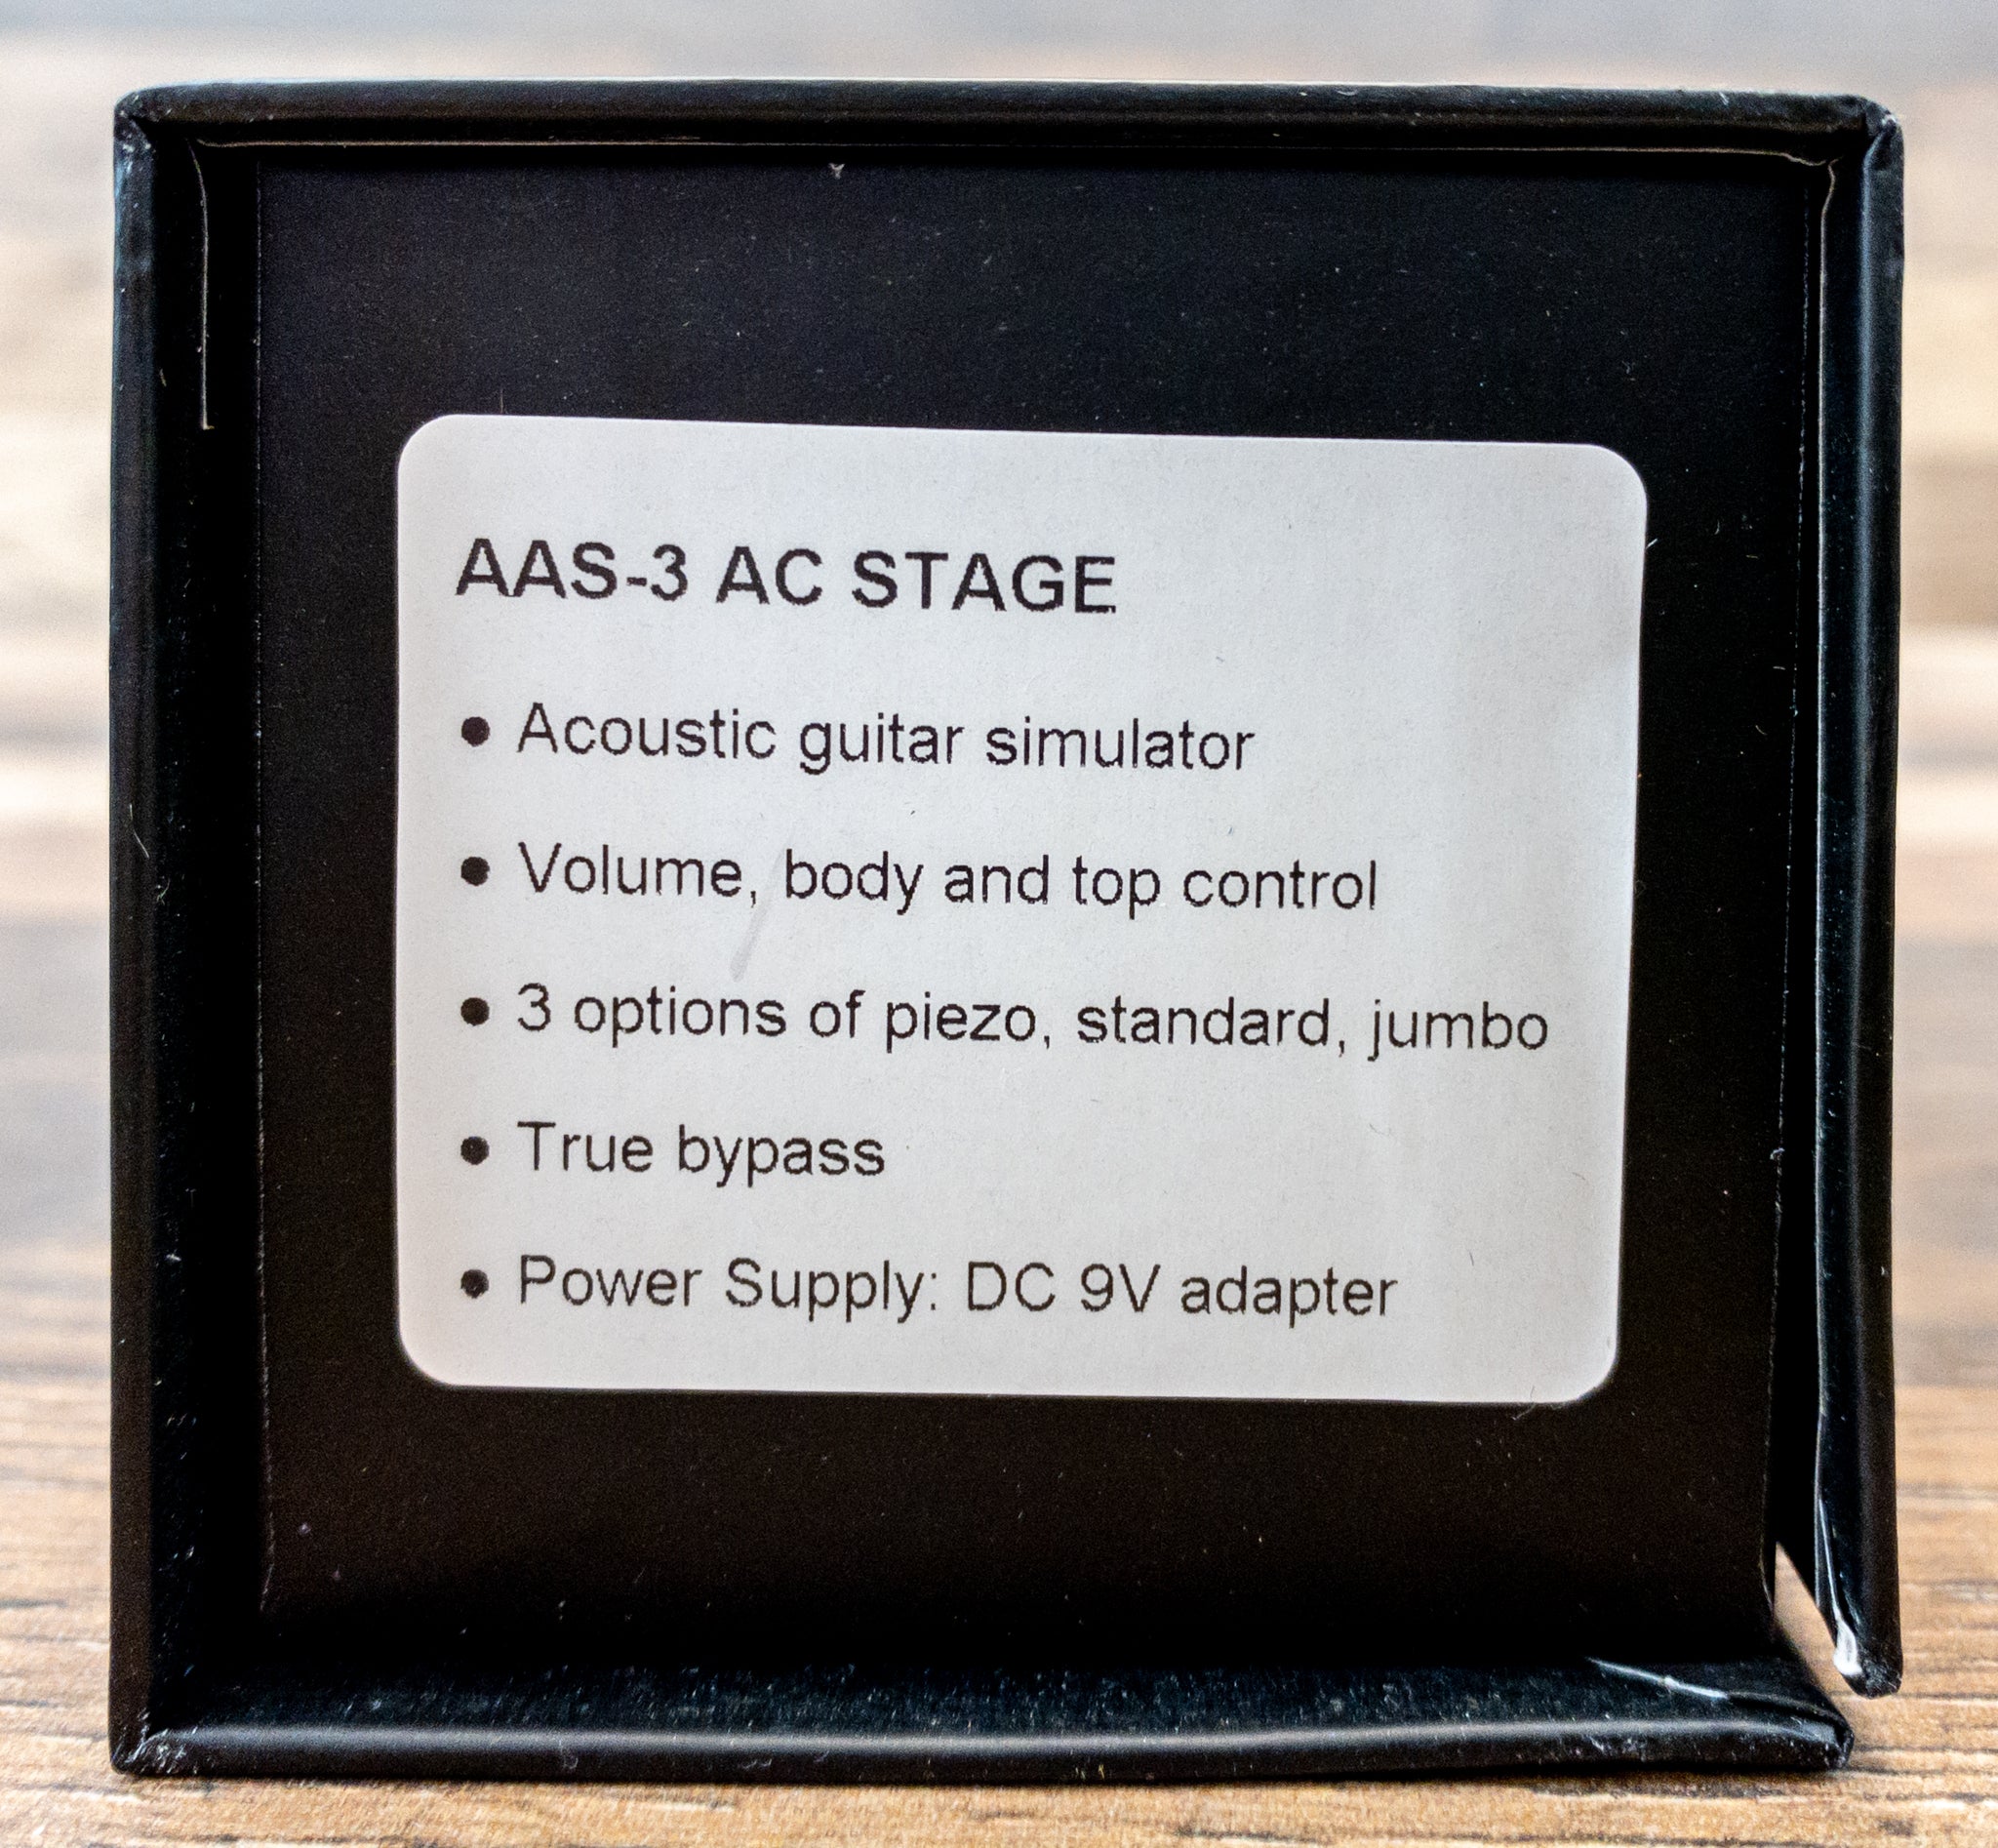 Tom'sline AAS-3 AC Stage Guitar Effects Pedal Simulates 3 Acoustic Guitar Tones